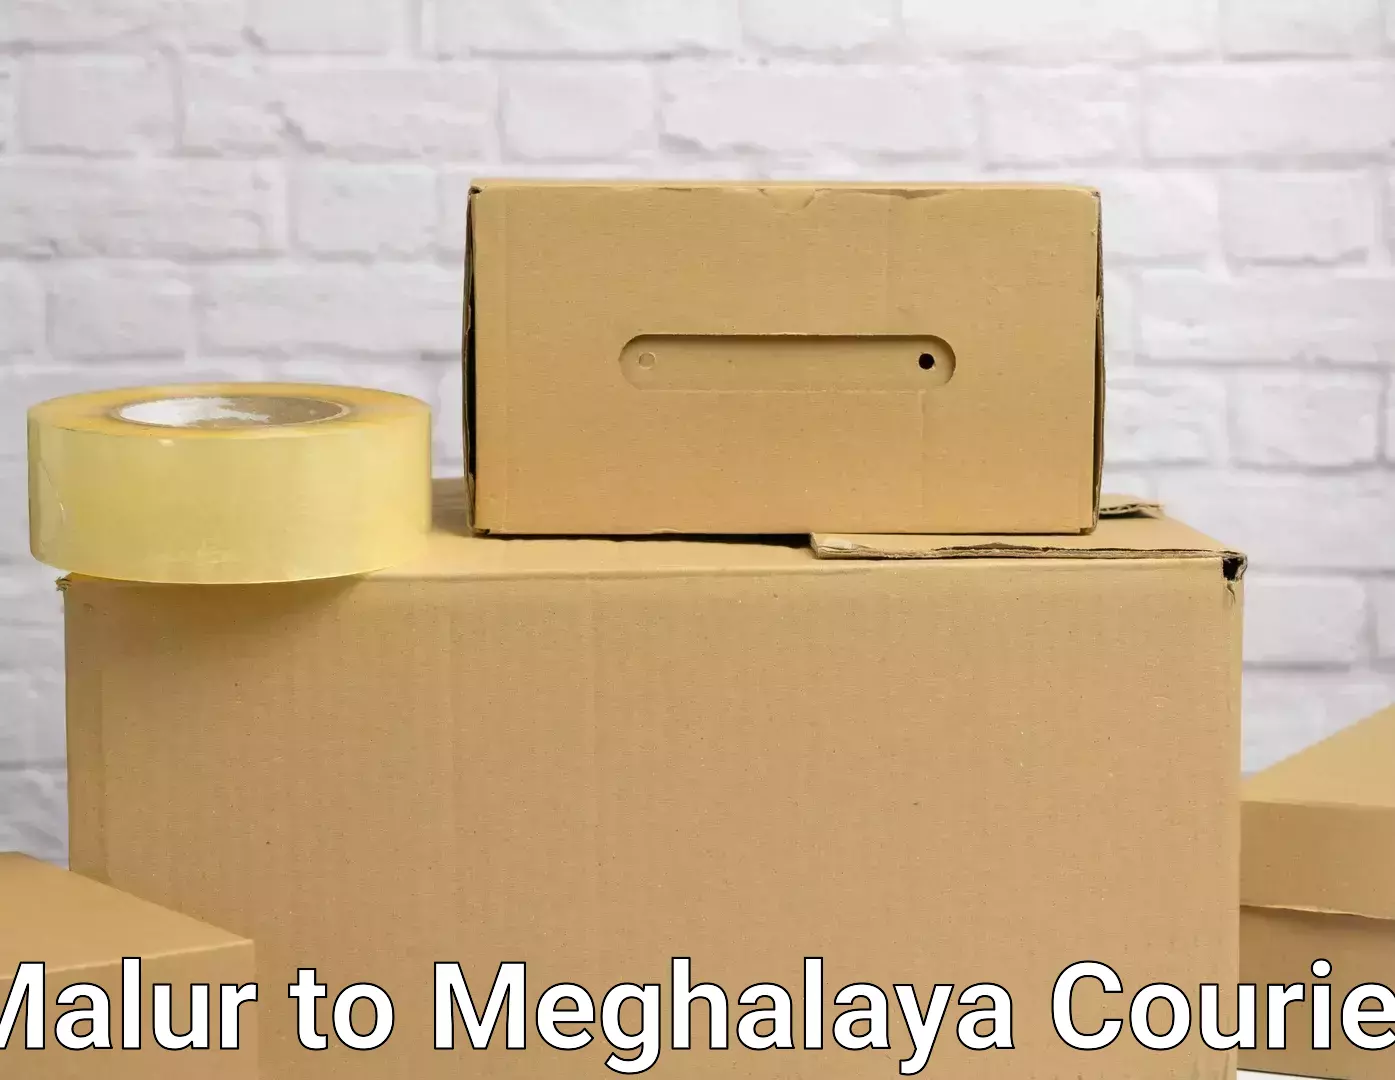 Furniture delivery service Malur to Meghalaya